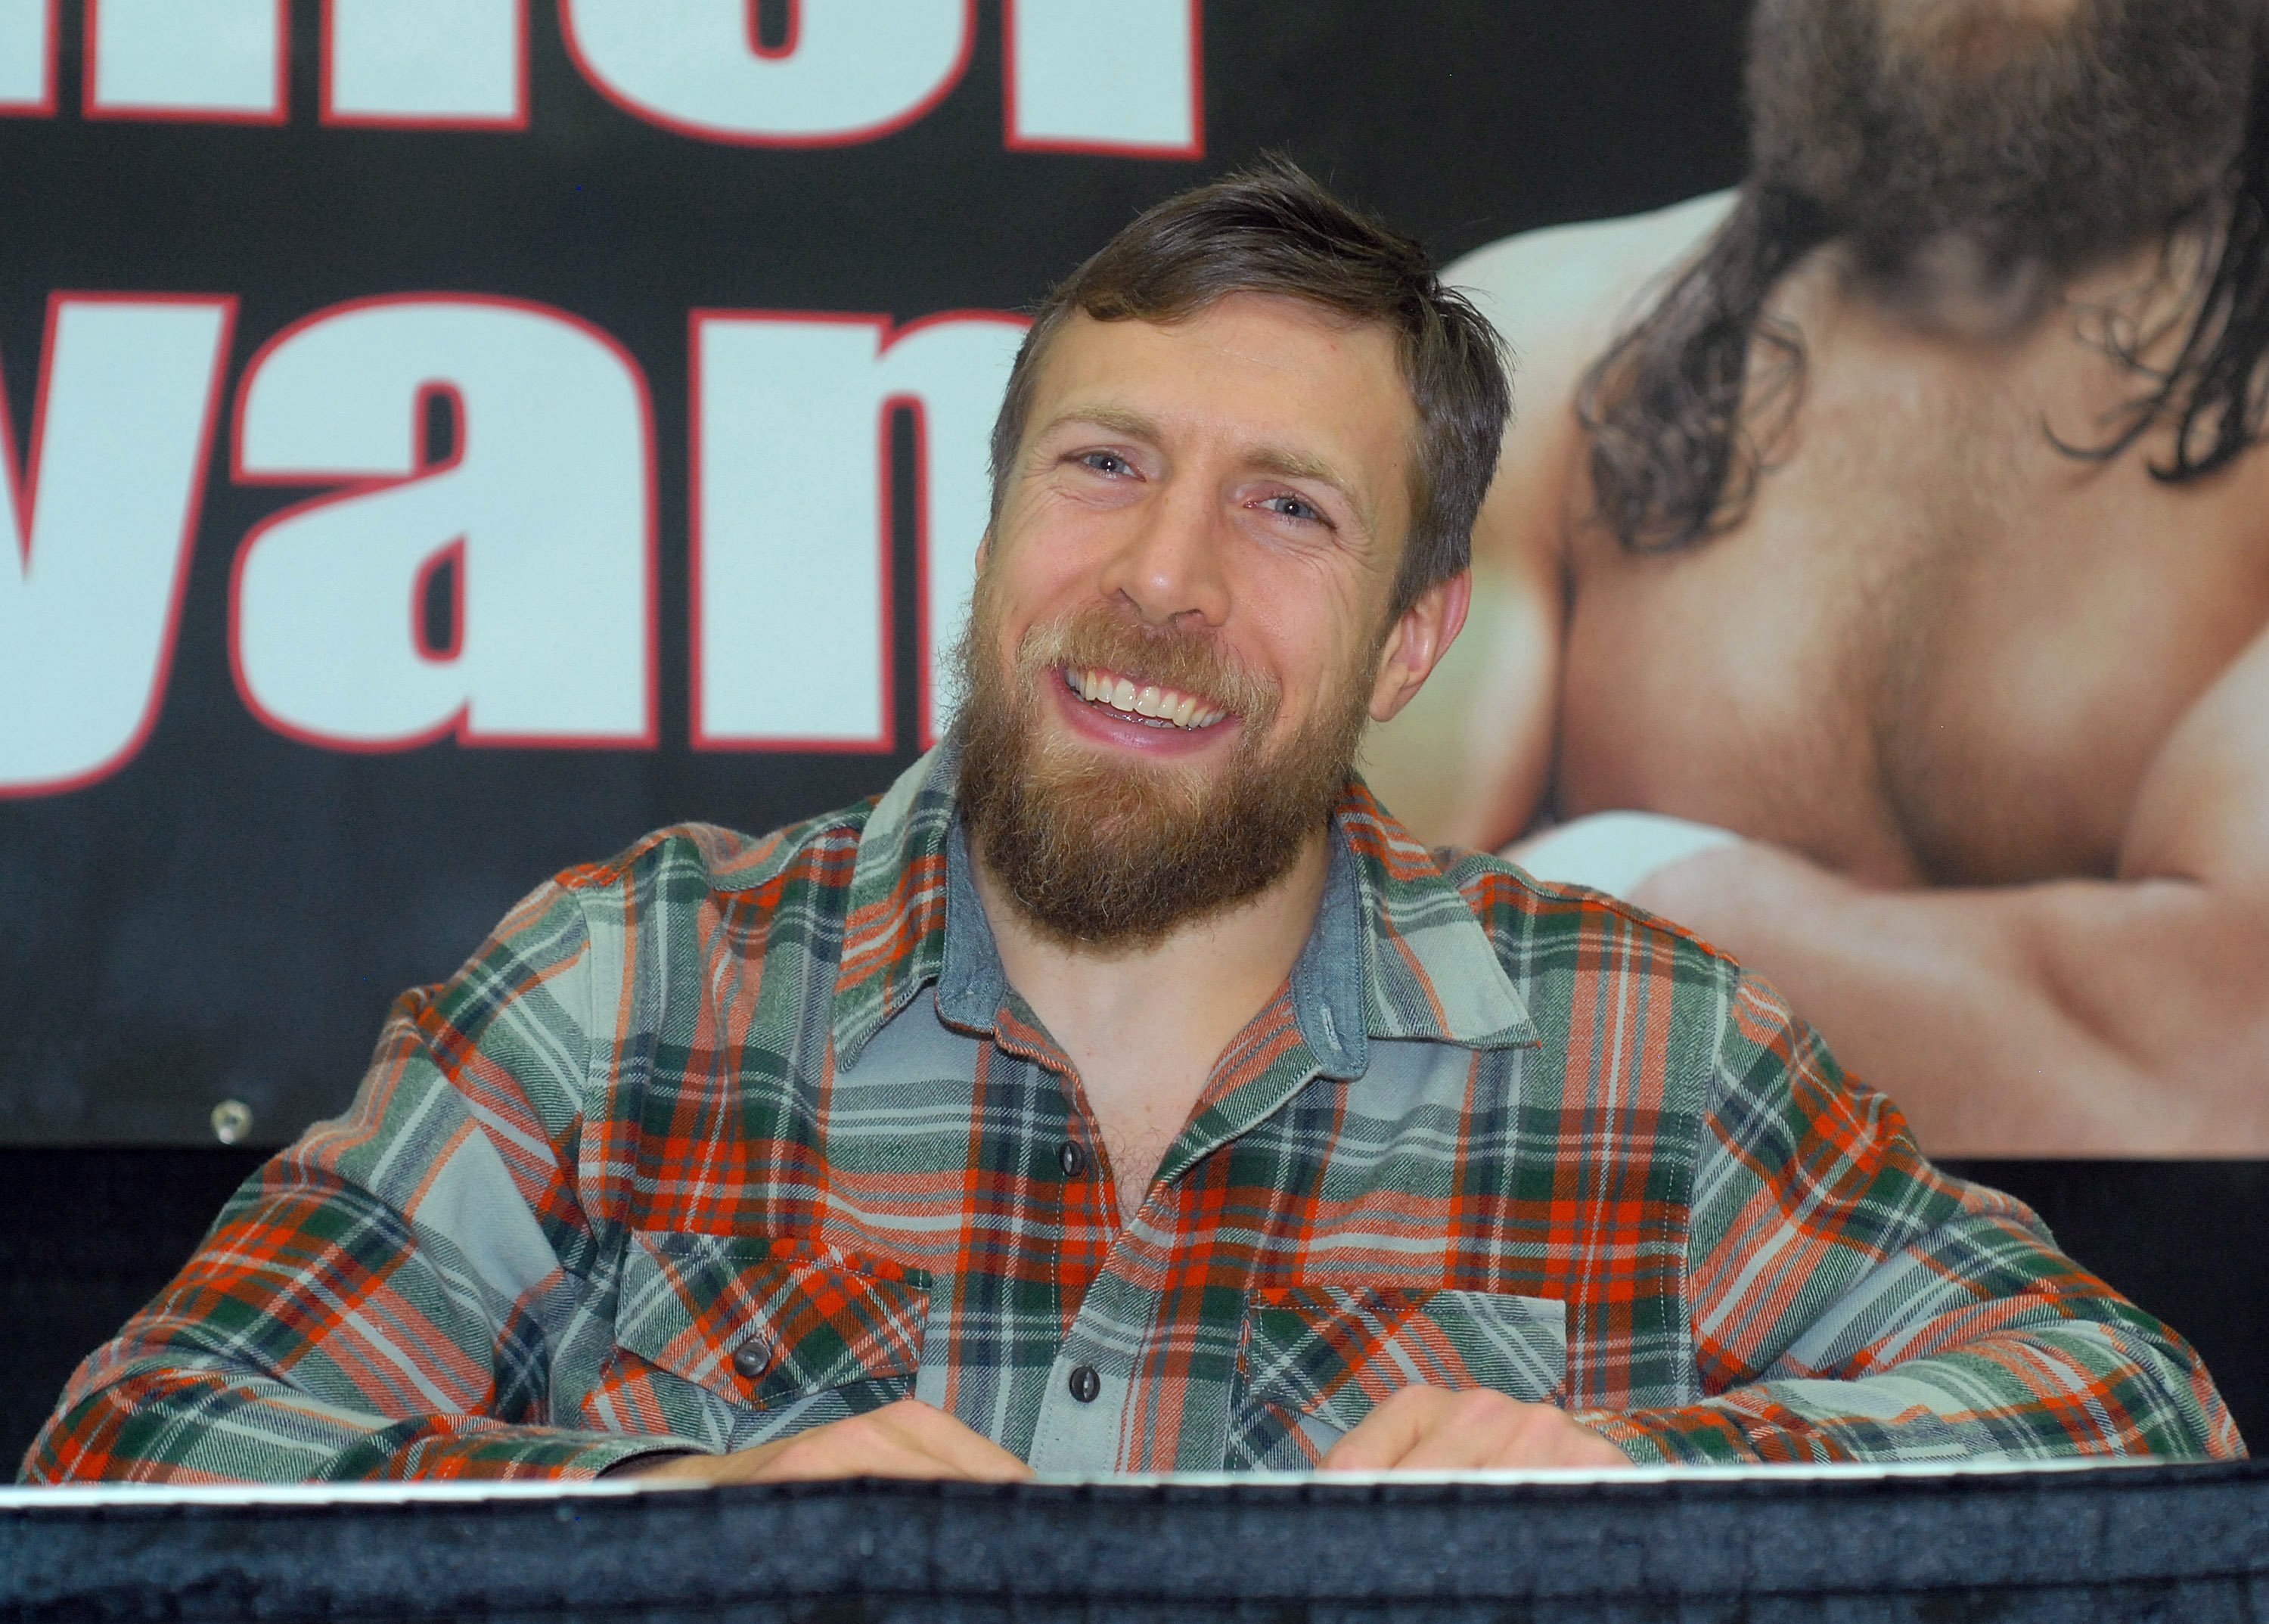 Daniel Bryan Confirms He Is Currently Trying To Get Cleared By WWE For In-Ring Return; Talks Politics Around Concussions